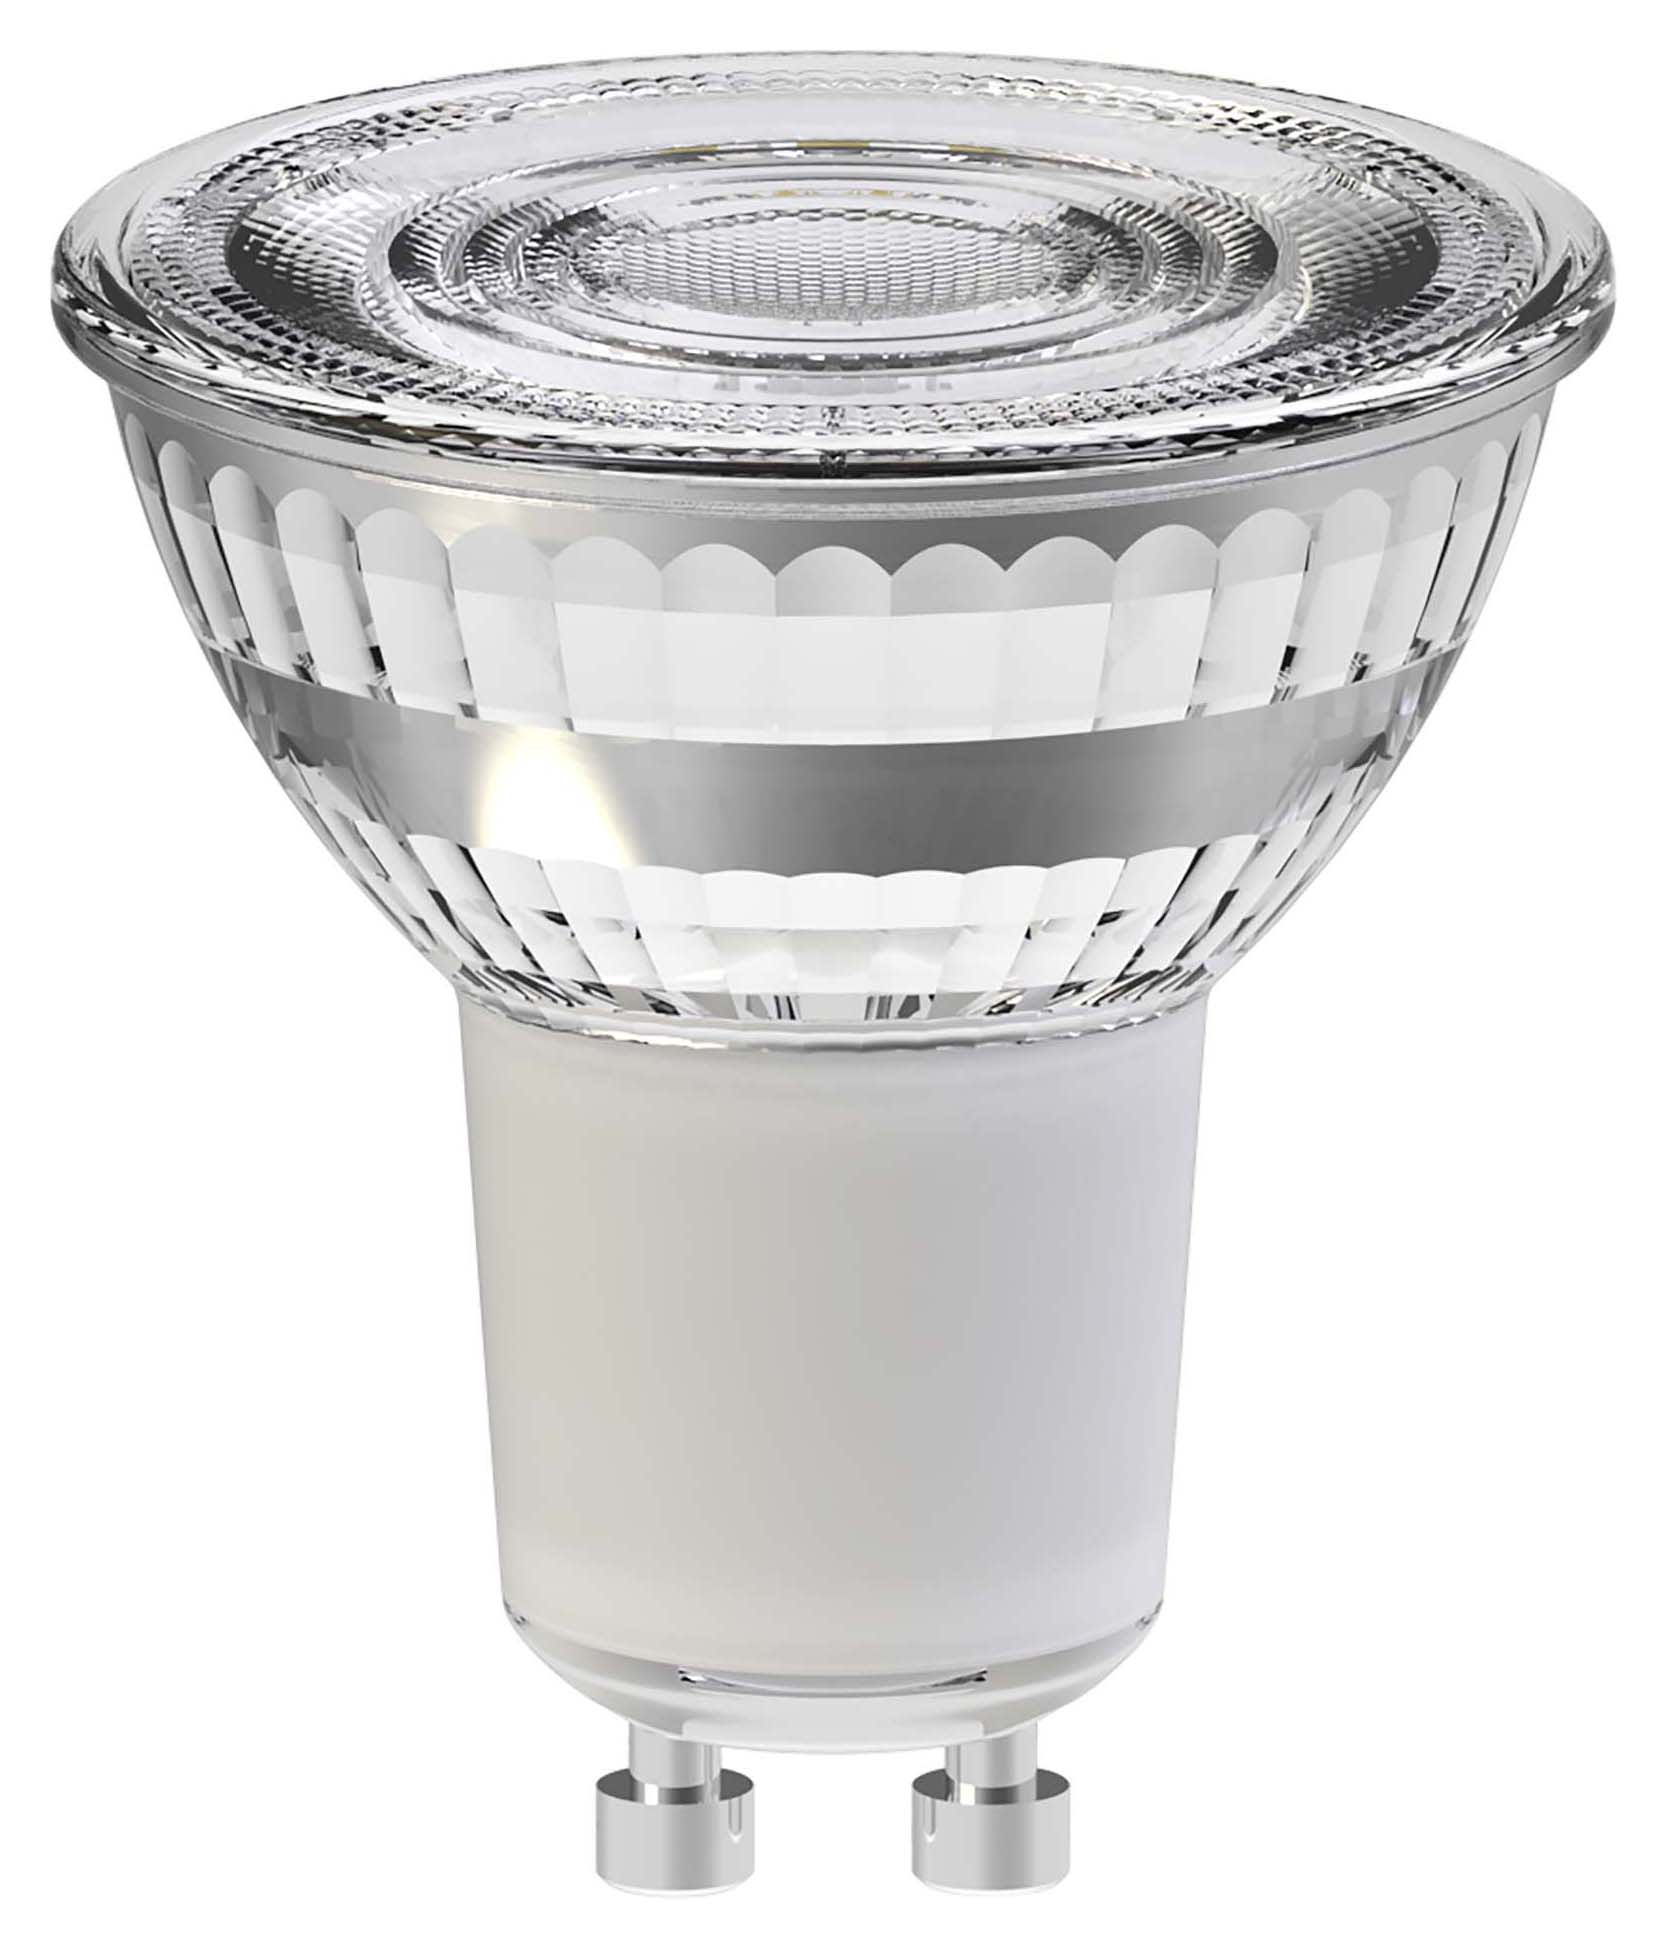 Wickes Dimmable LED GU10 4.2W Warm White Light